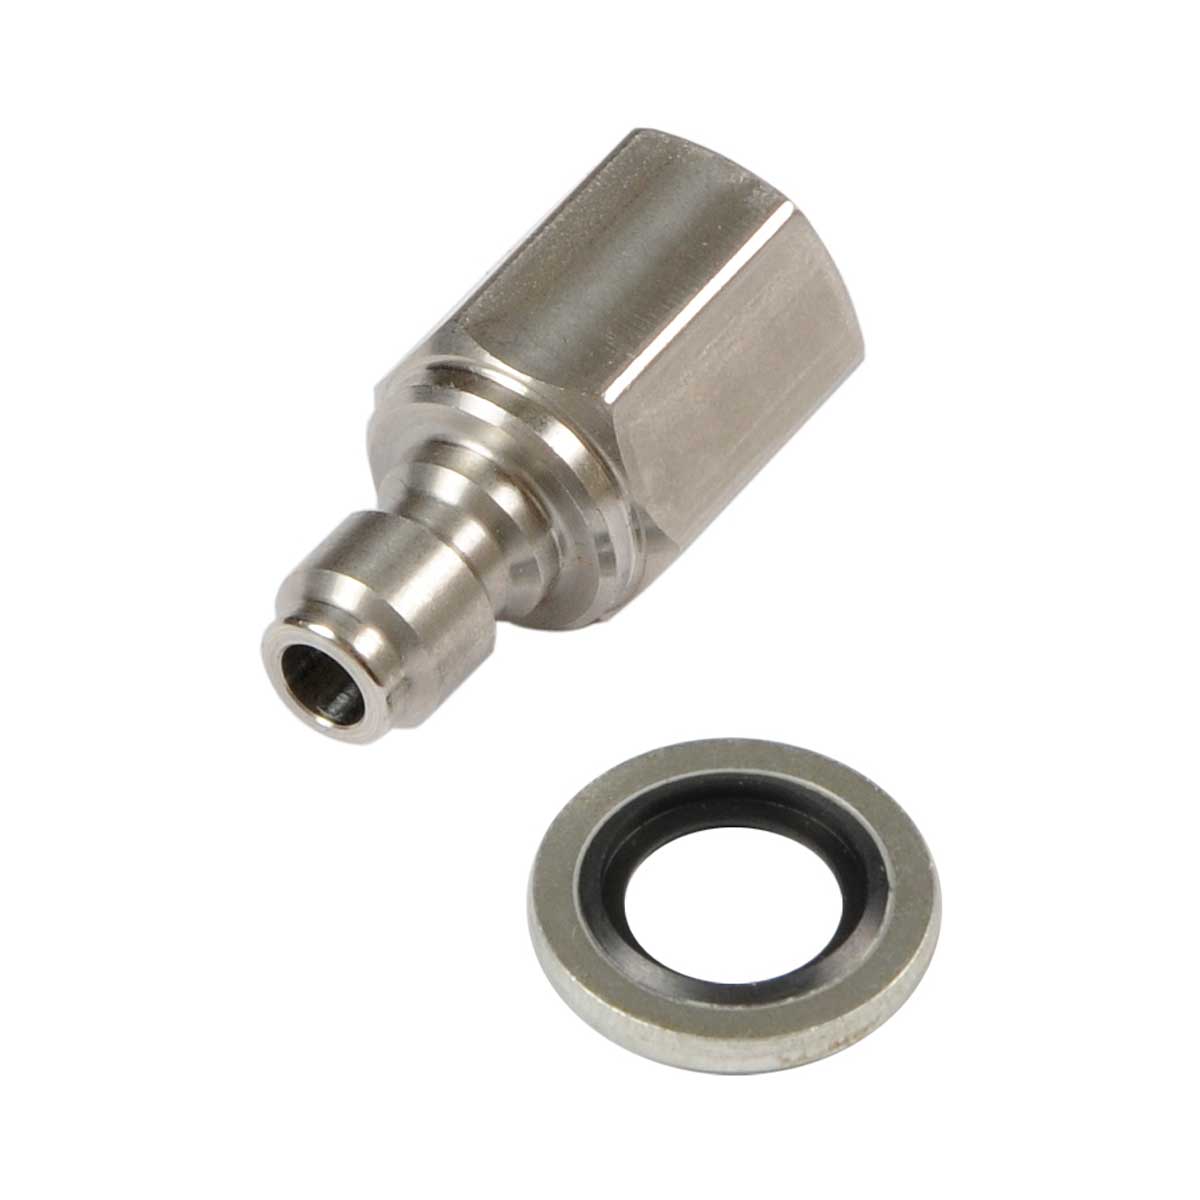 MALE QUICK RELEASE COUPLING FITTING & SEAL WASHER 300 BAR (QC/MALE)